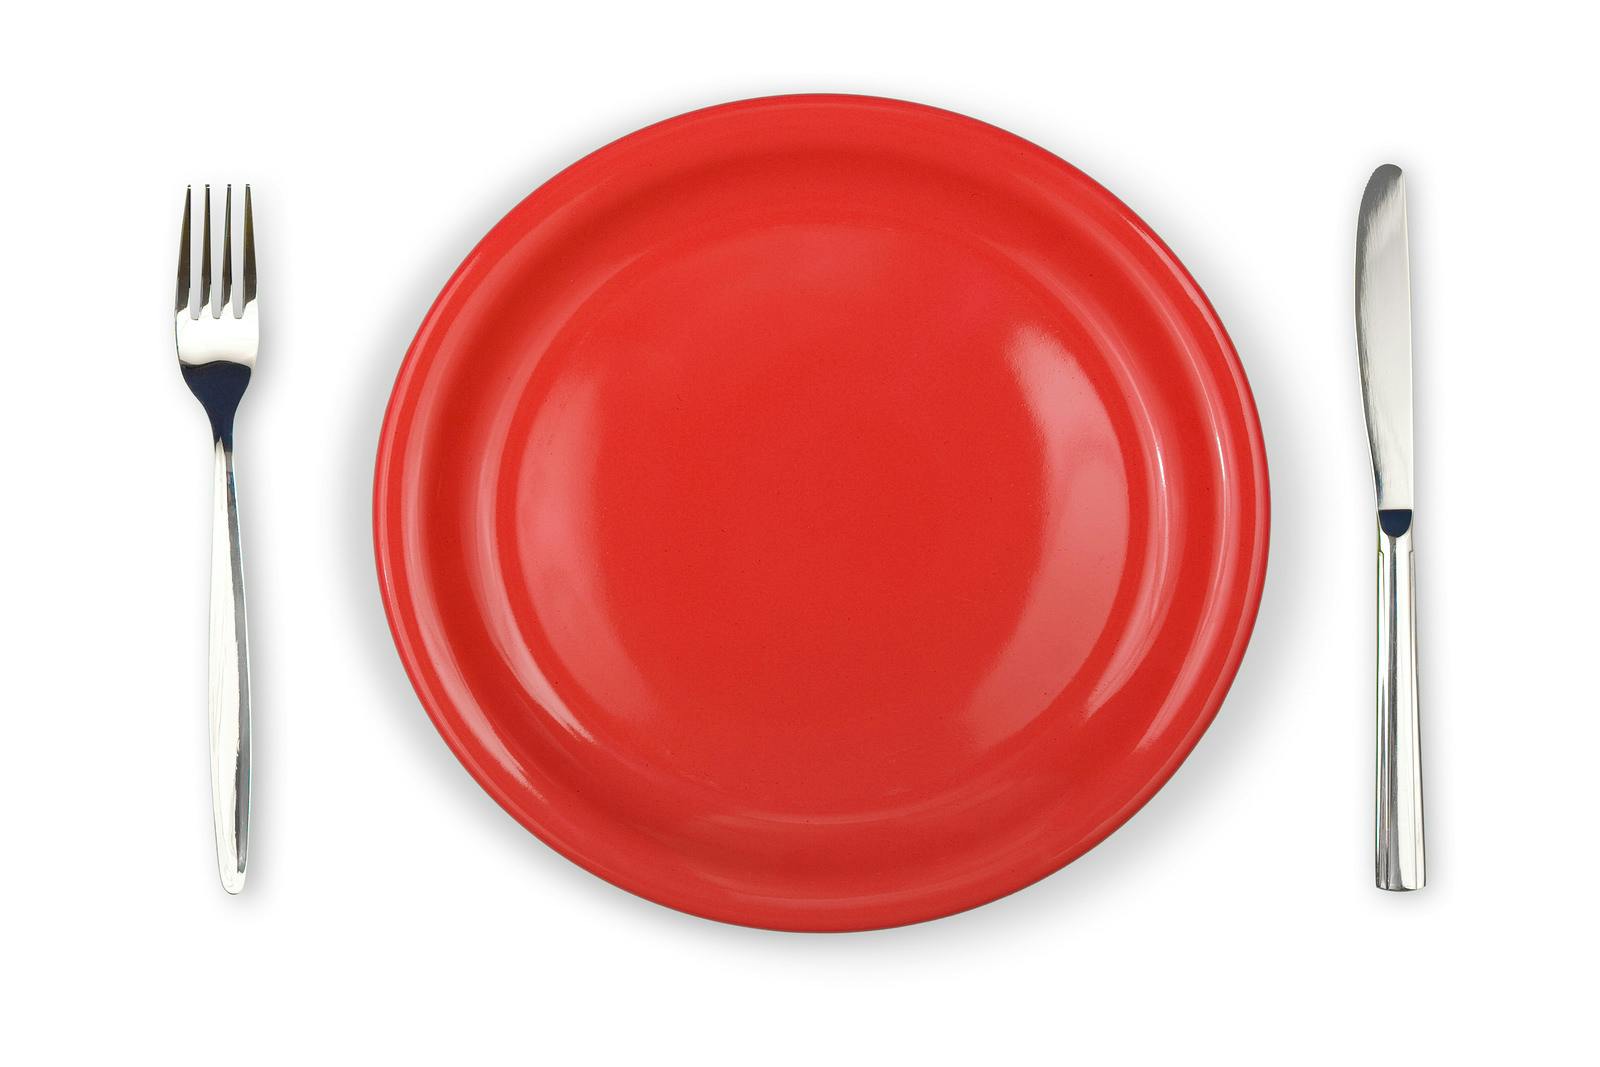 Knife, red plate and fork isolated
